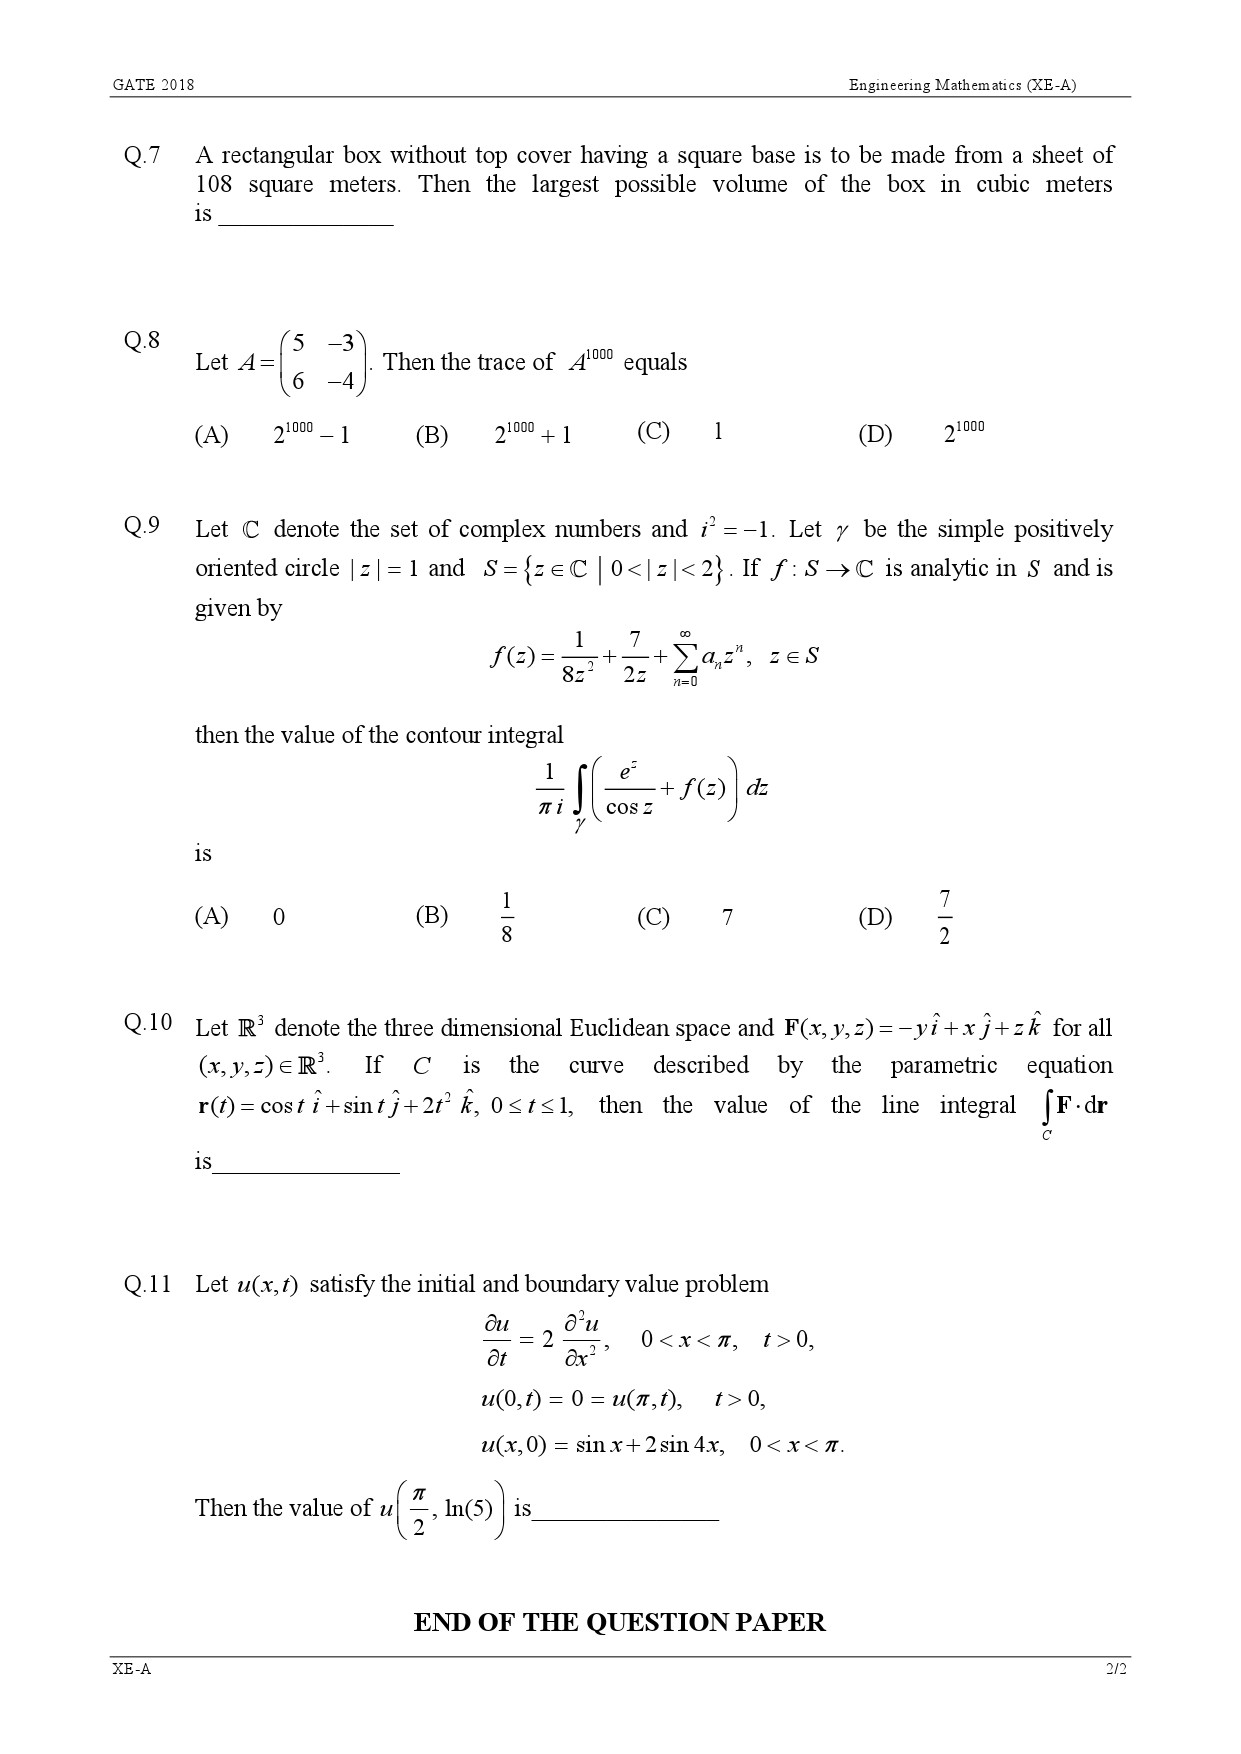 GATE Exam Question Paper 2018 Engineering Sciences 4